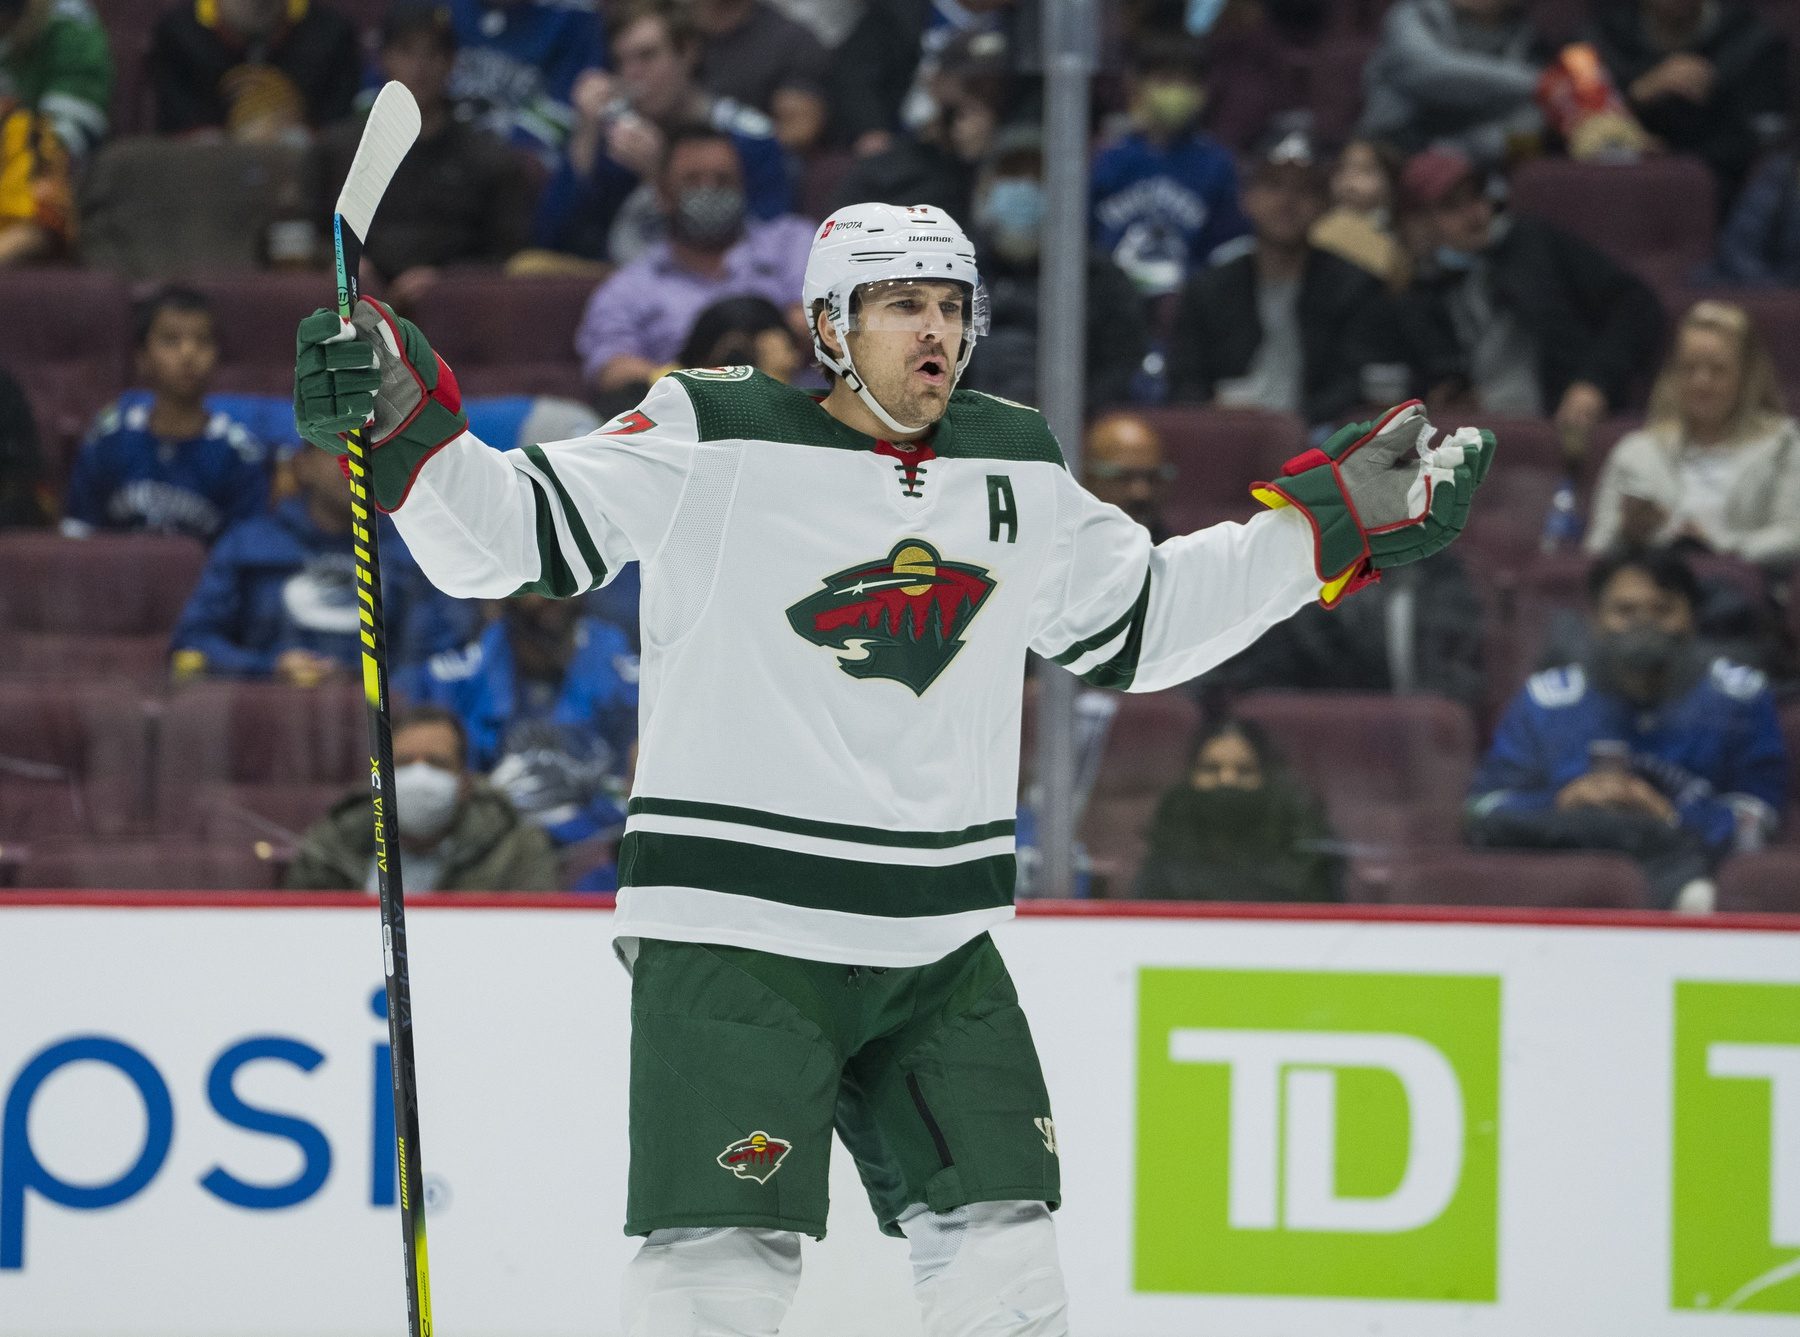 Marcus Foligno is Developing as a Dominant Player and Pleasing the